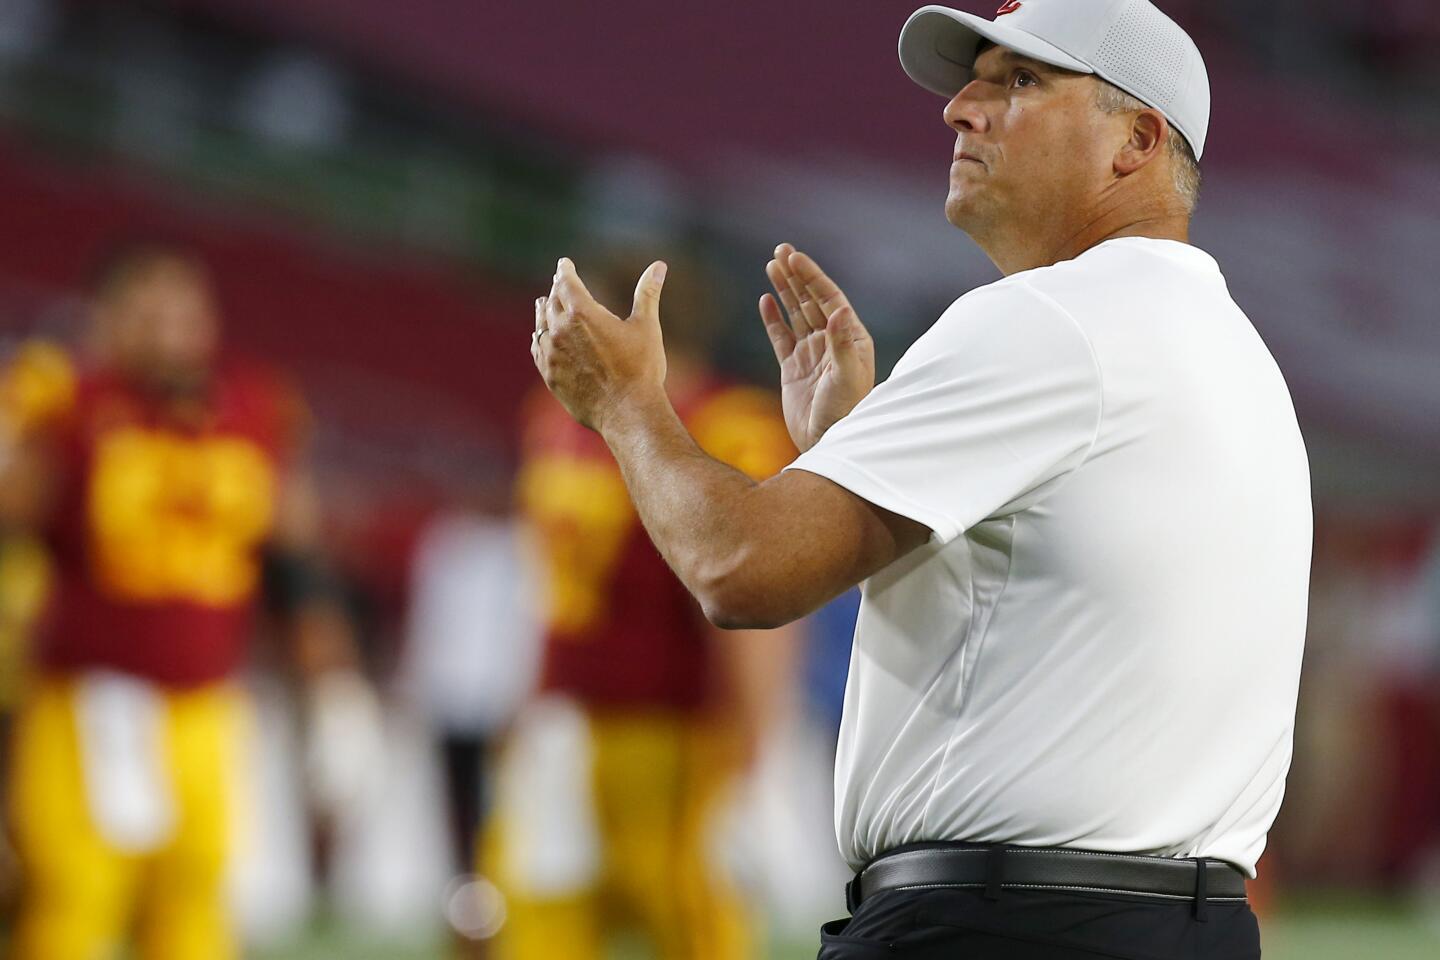 USC coach Clay Helton watches his team warm up before the game against Stanford at the L.A. Memorial Coliseum on Saturday night, Sep. 7, 2019.